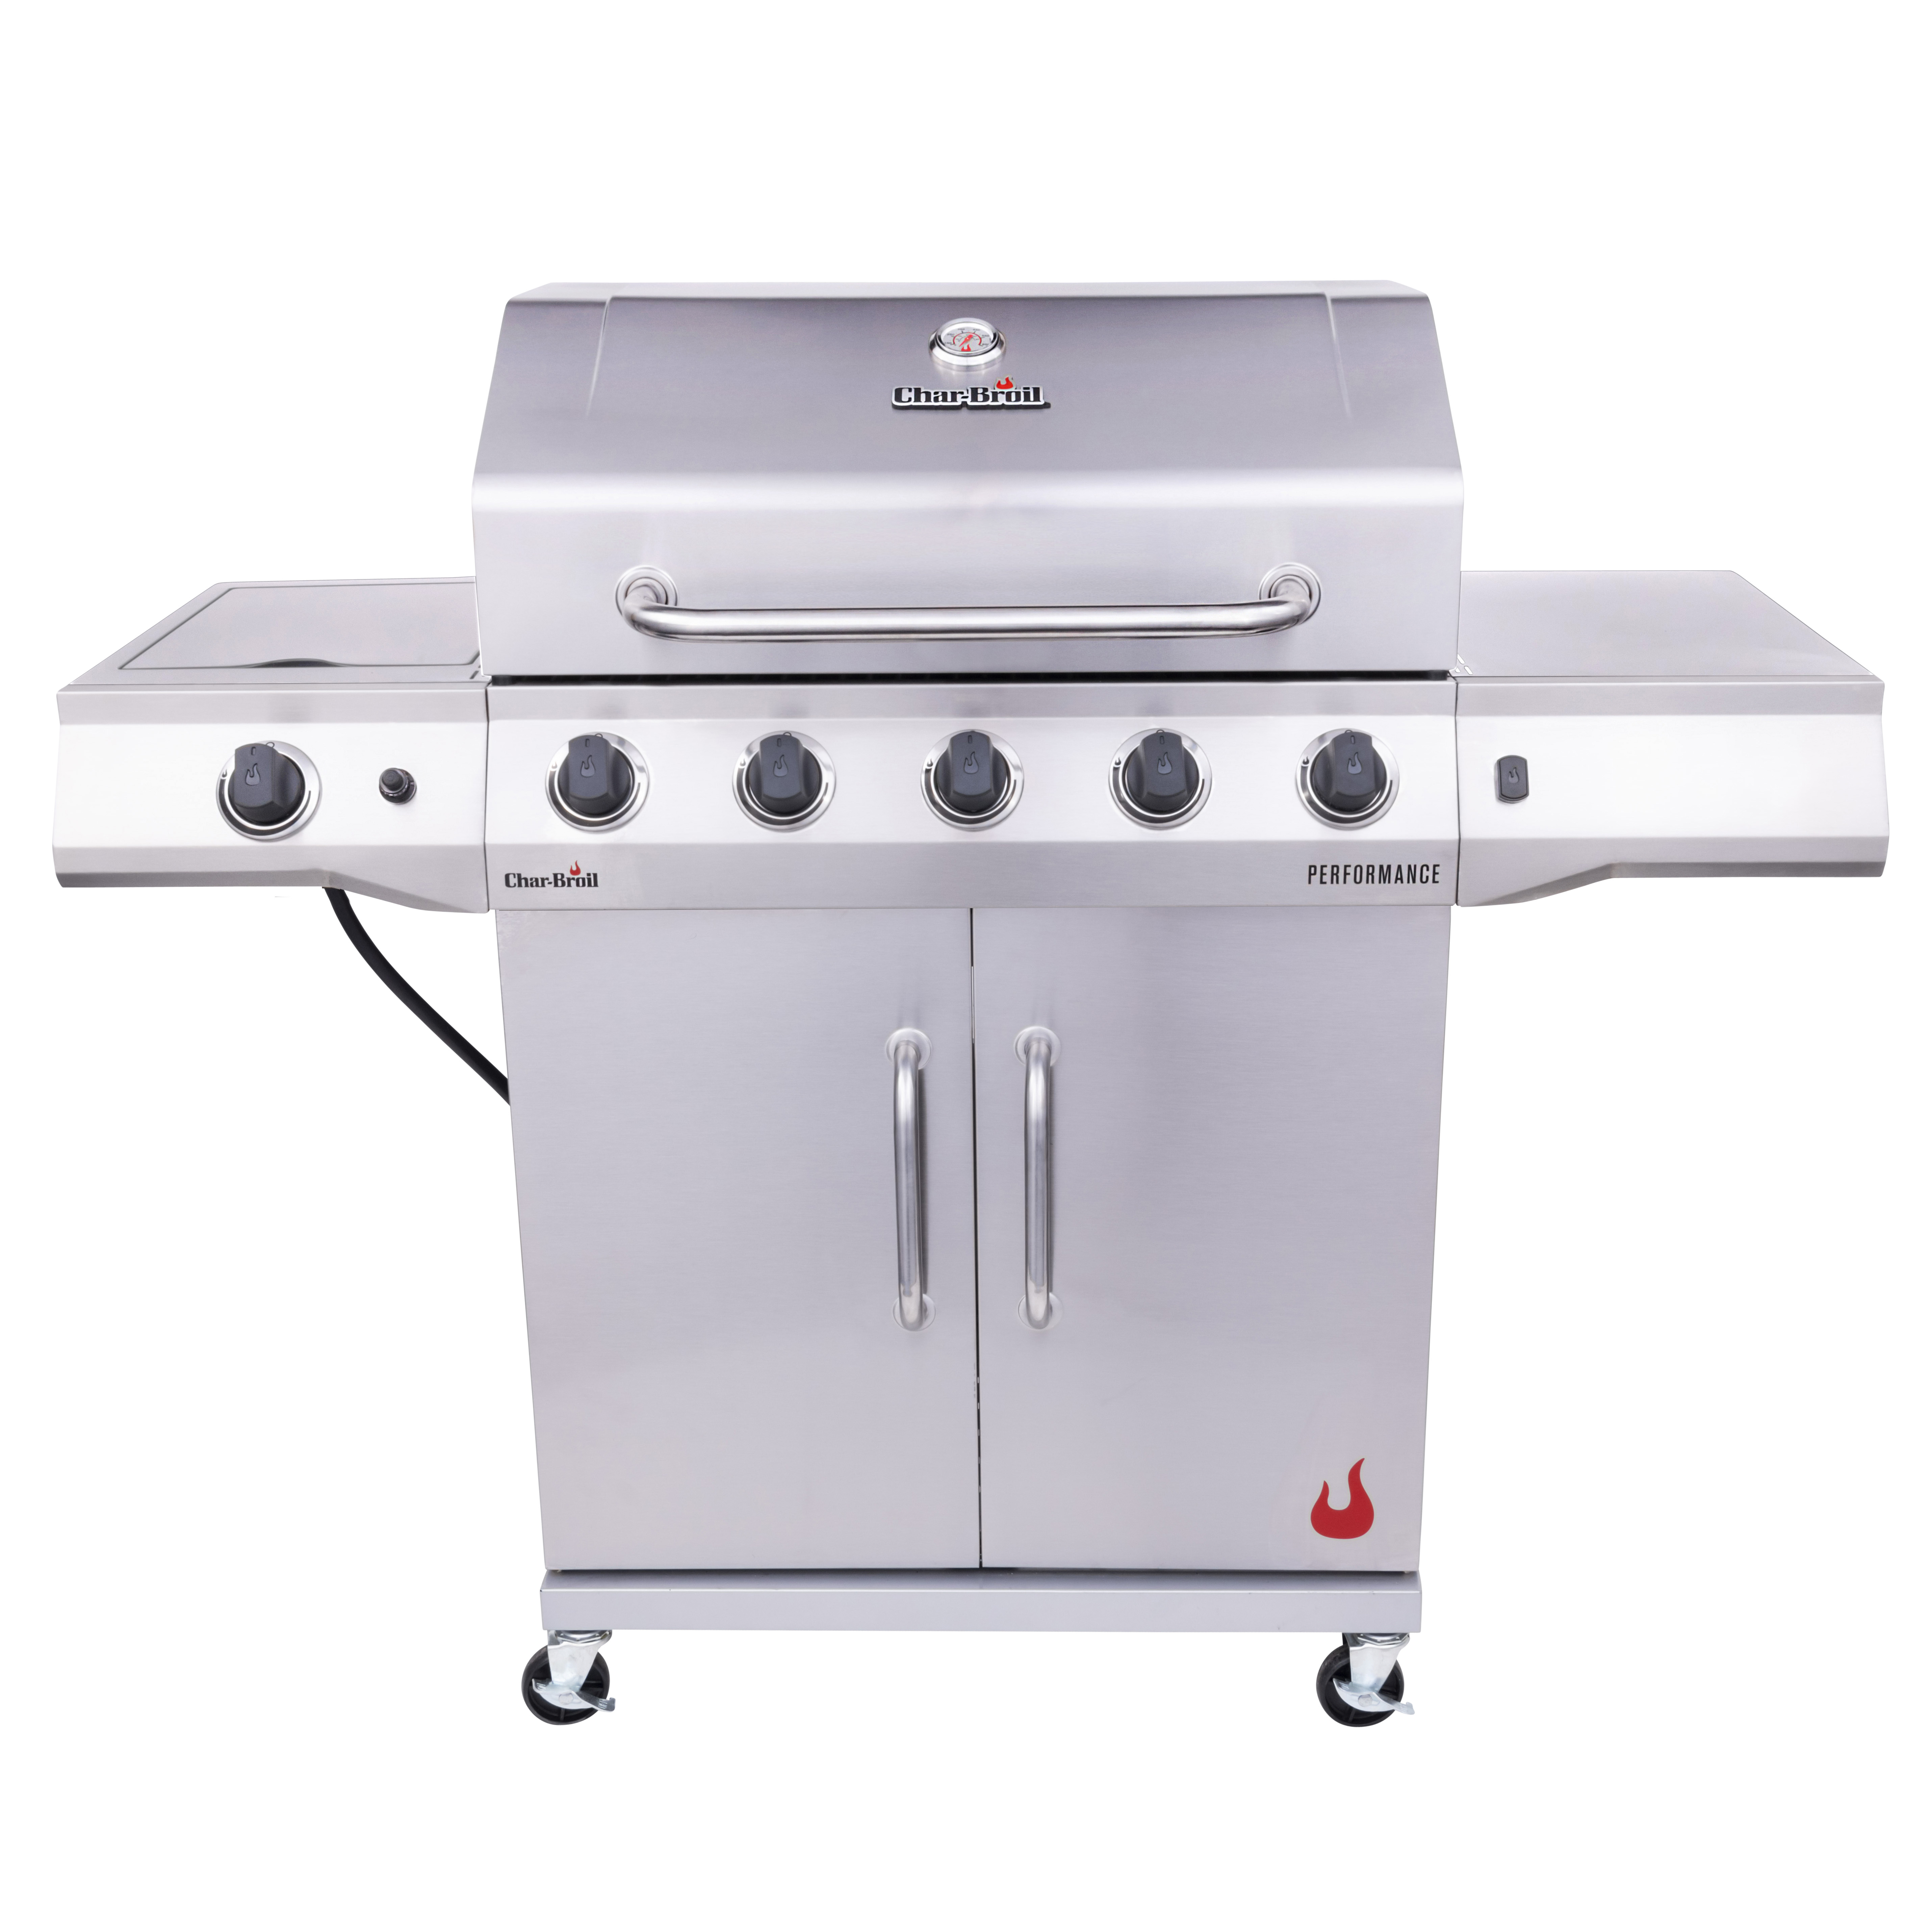 Char-Broil Performance 5-Burner Liquid Propane Gas Grill, Stainless Steel - image 1 of 18